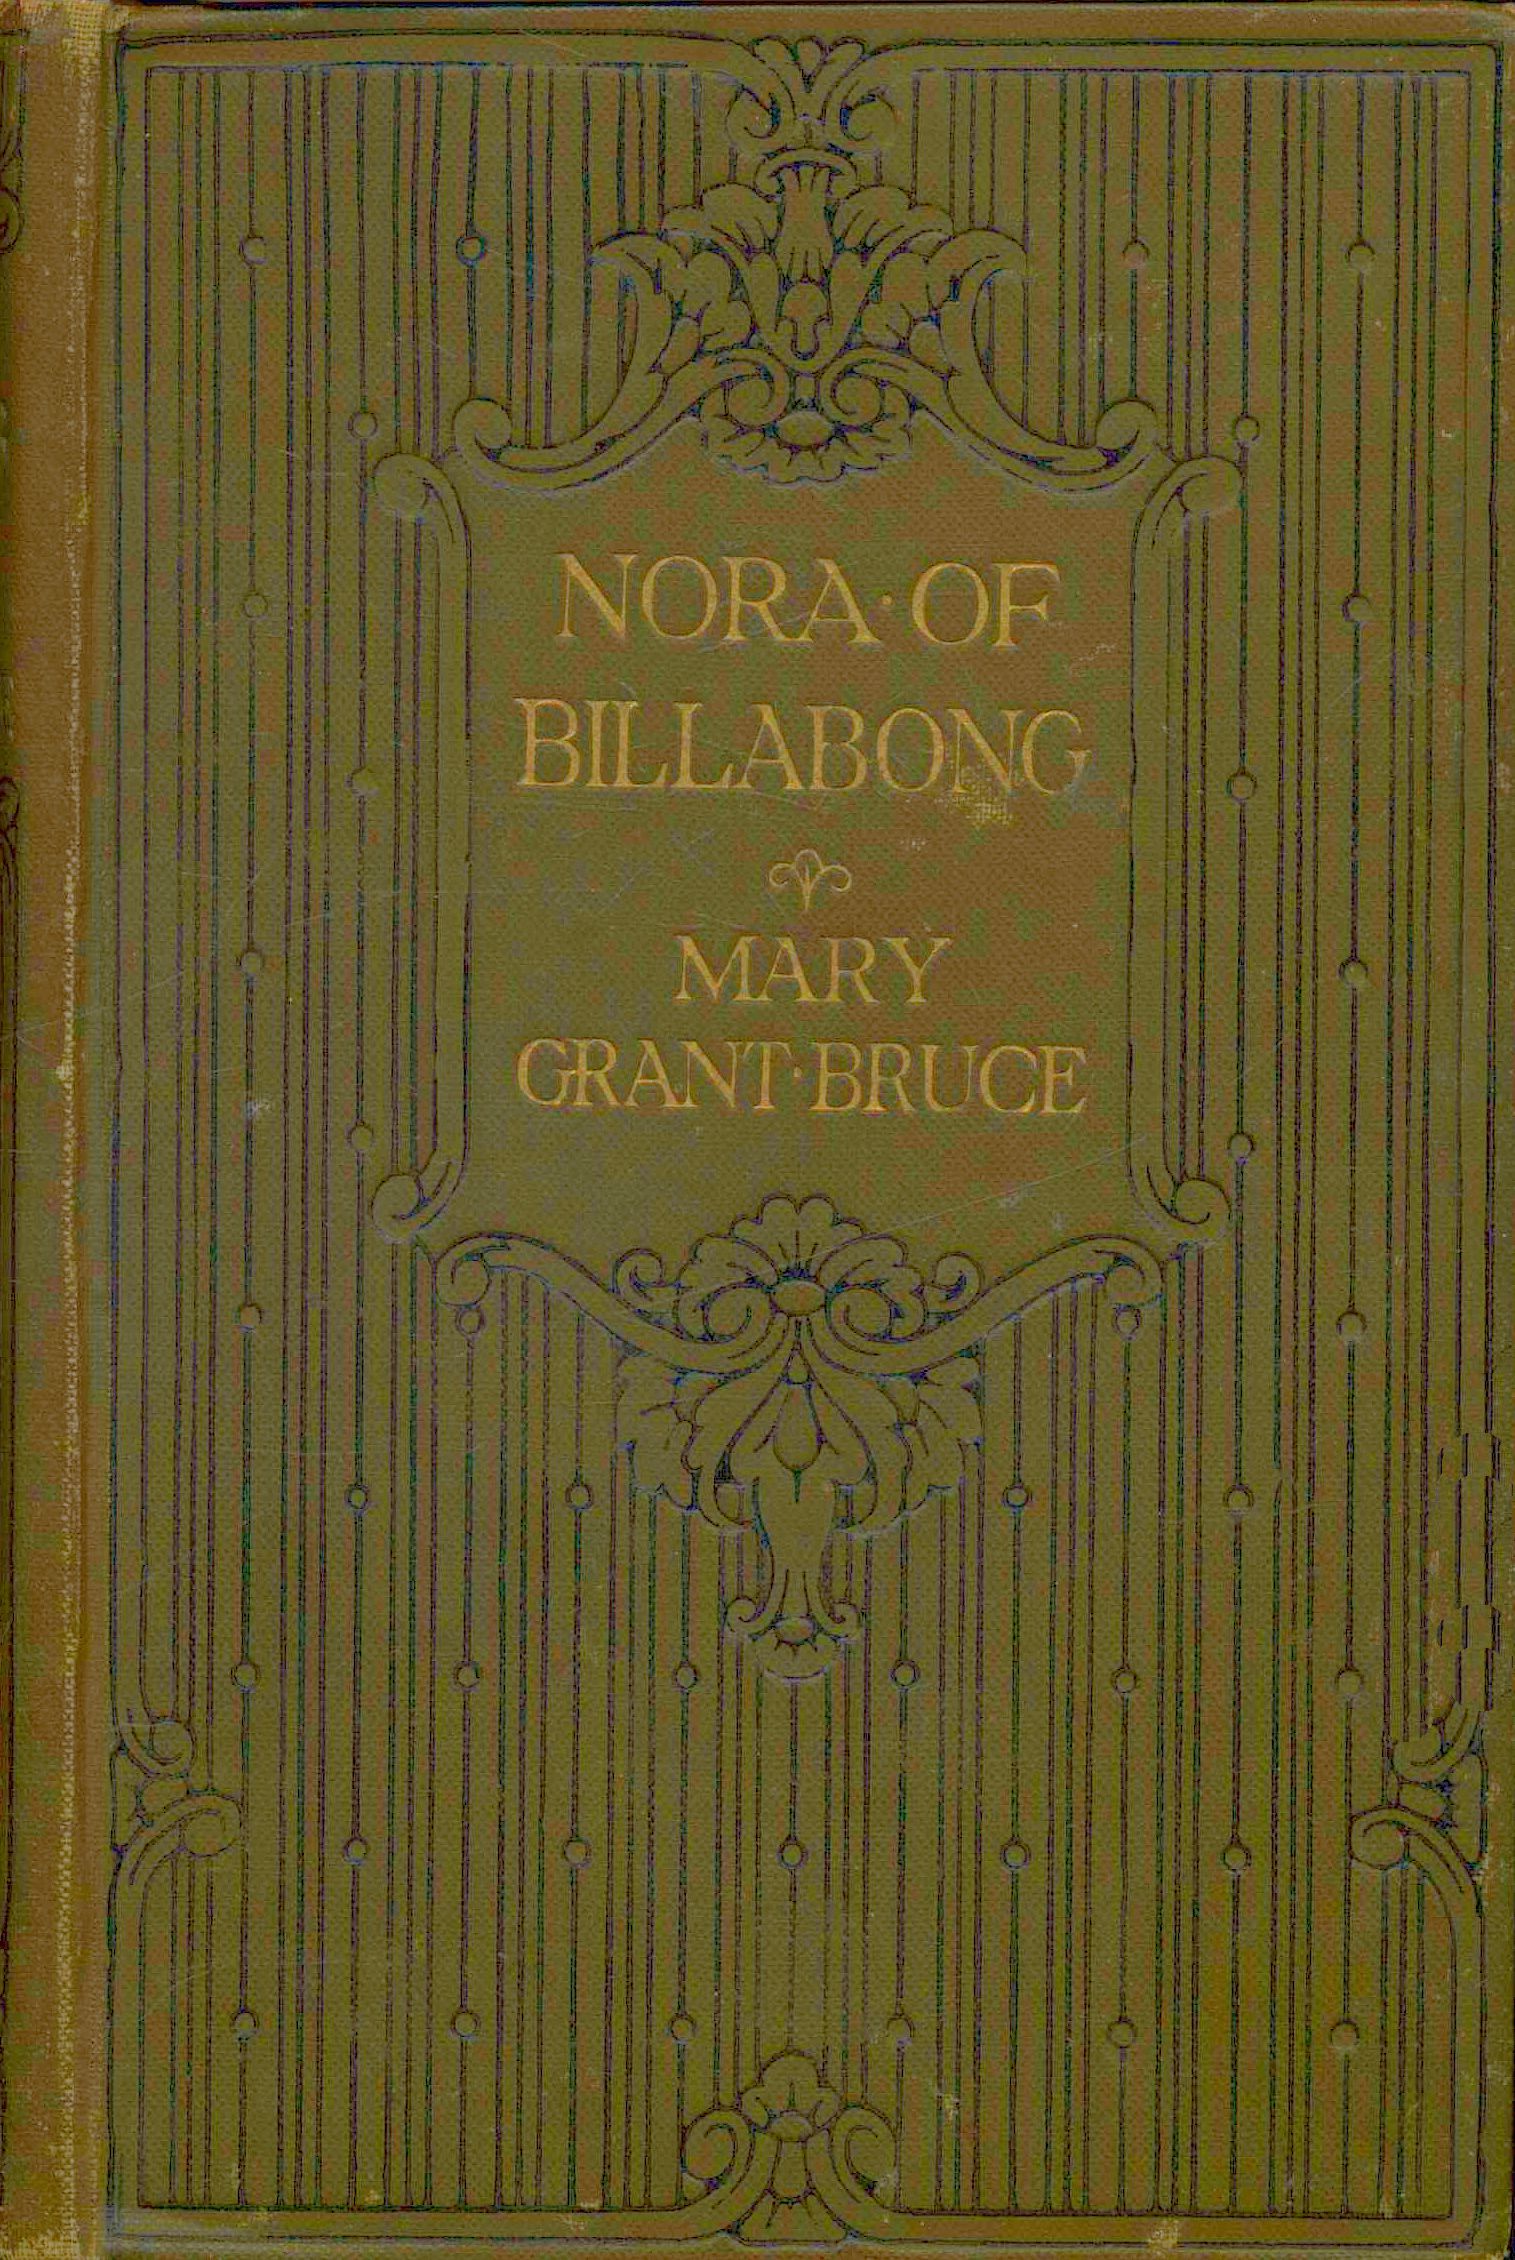 The Project Gutenberg eBook of Norah of Billabong by Mary Grant Bruce